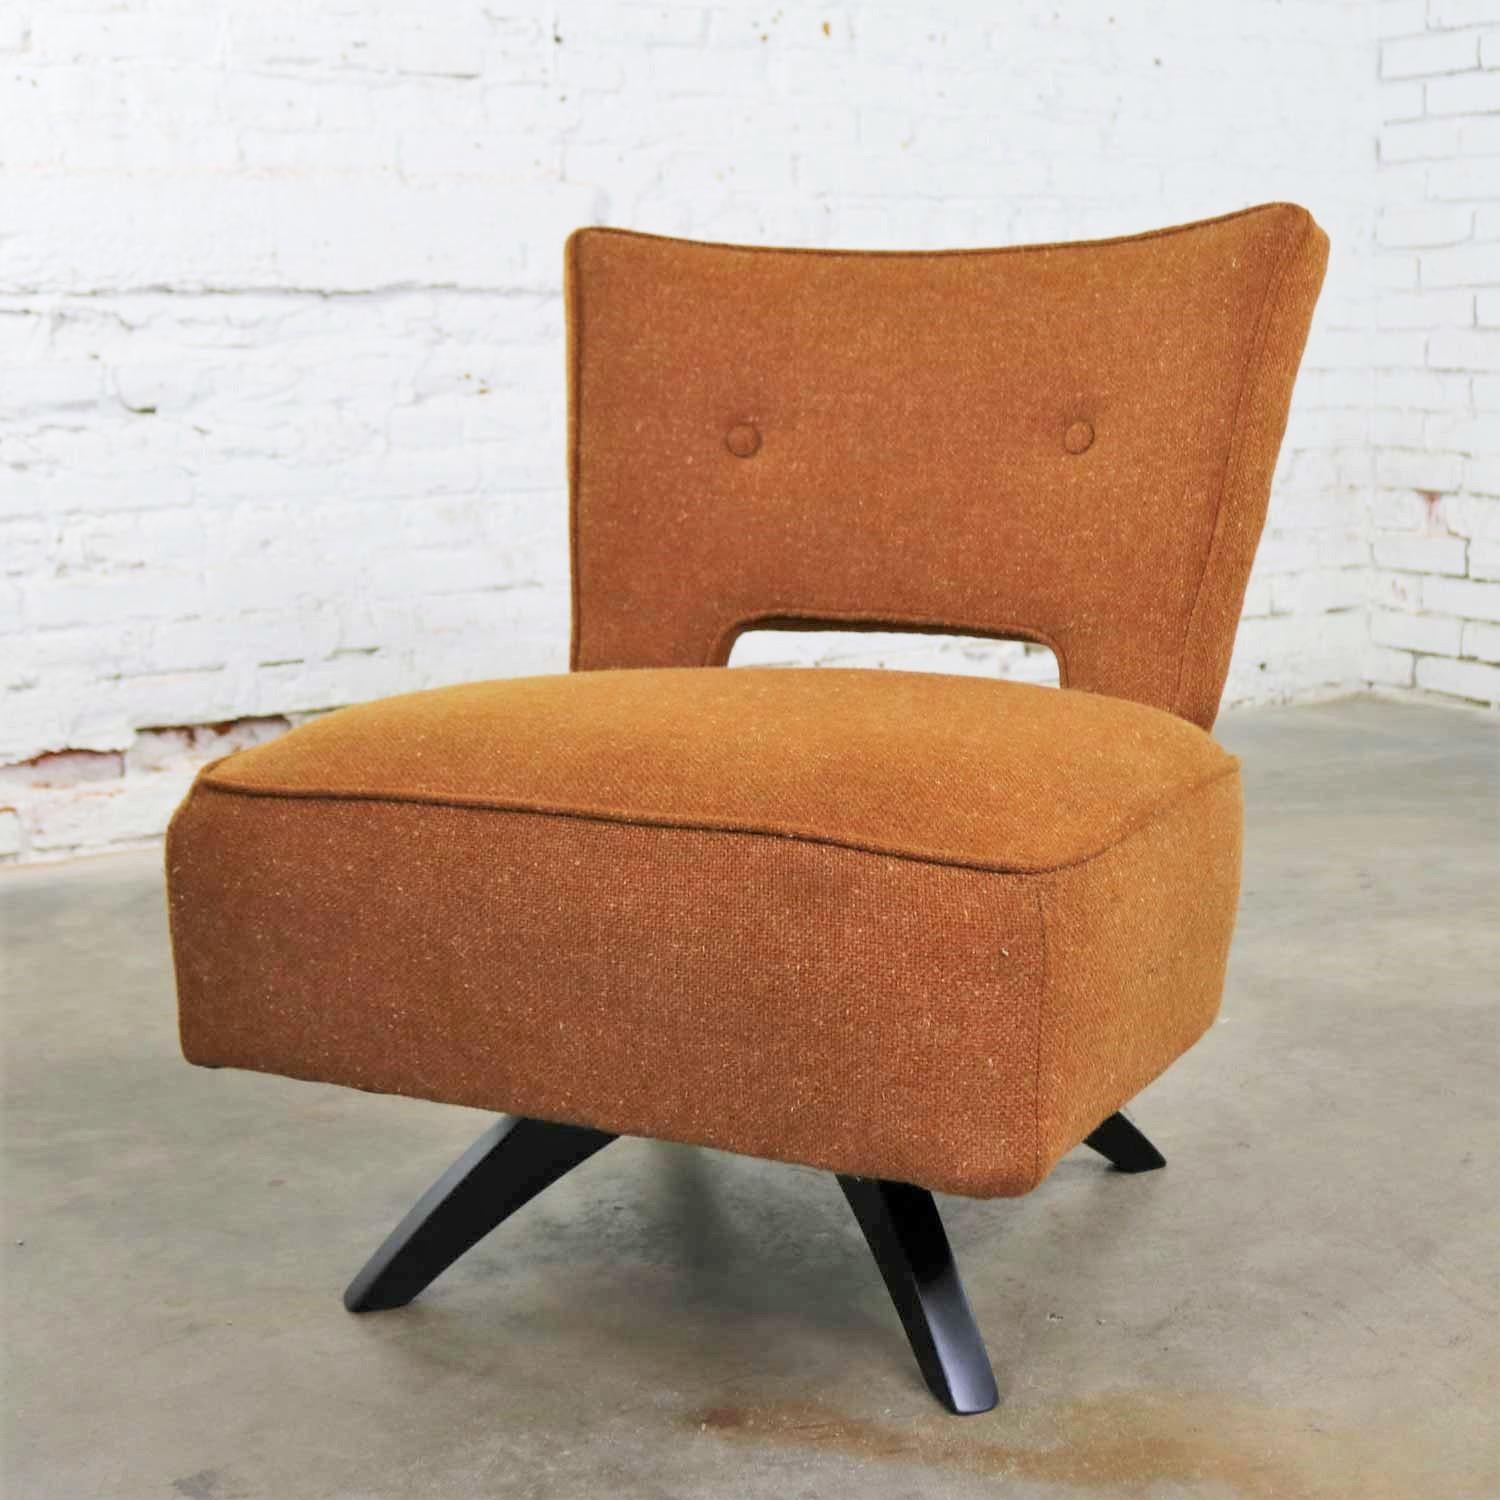 American Mid-Century Modern Swivel Slipper Chair Attributed to Kroehler Manufacturing